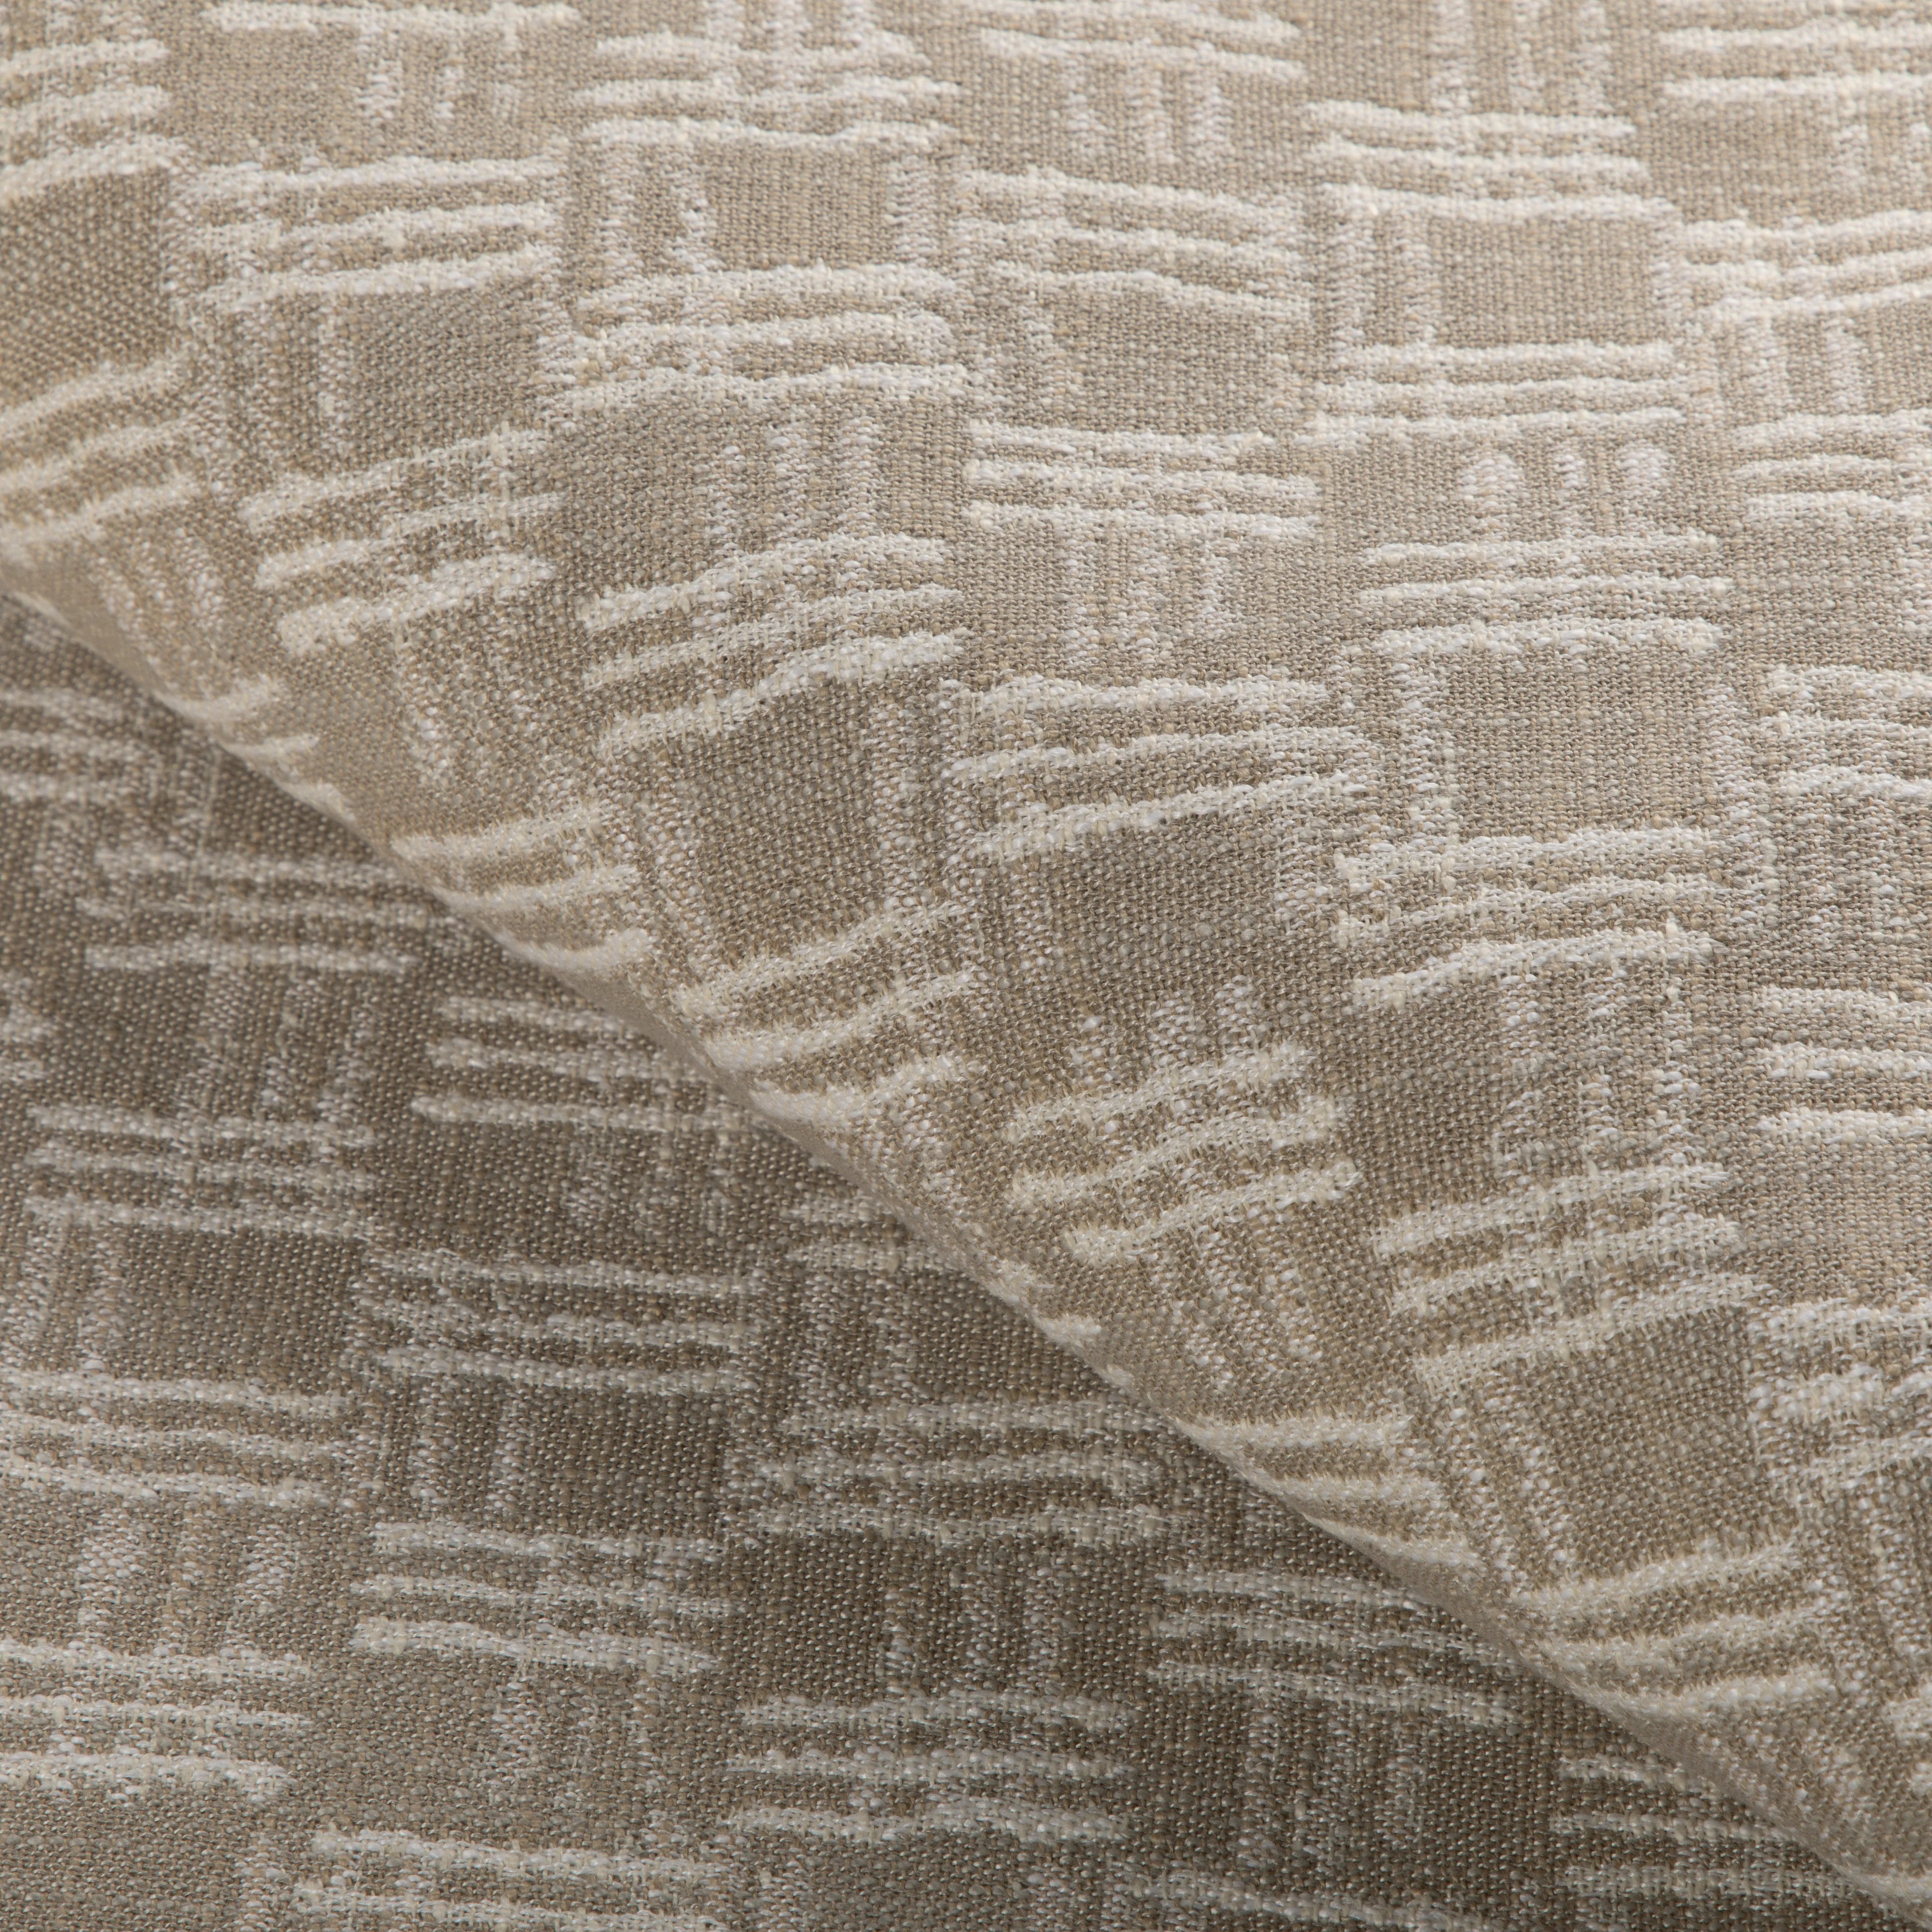 Fabric sample of Cross Waves fabric in sand color - pattern 36928.16.0 - by Kravet Couture in the Riviera collection